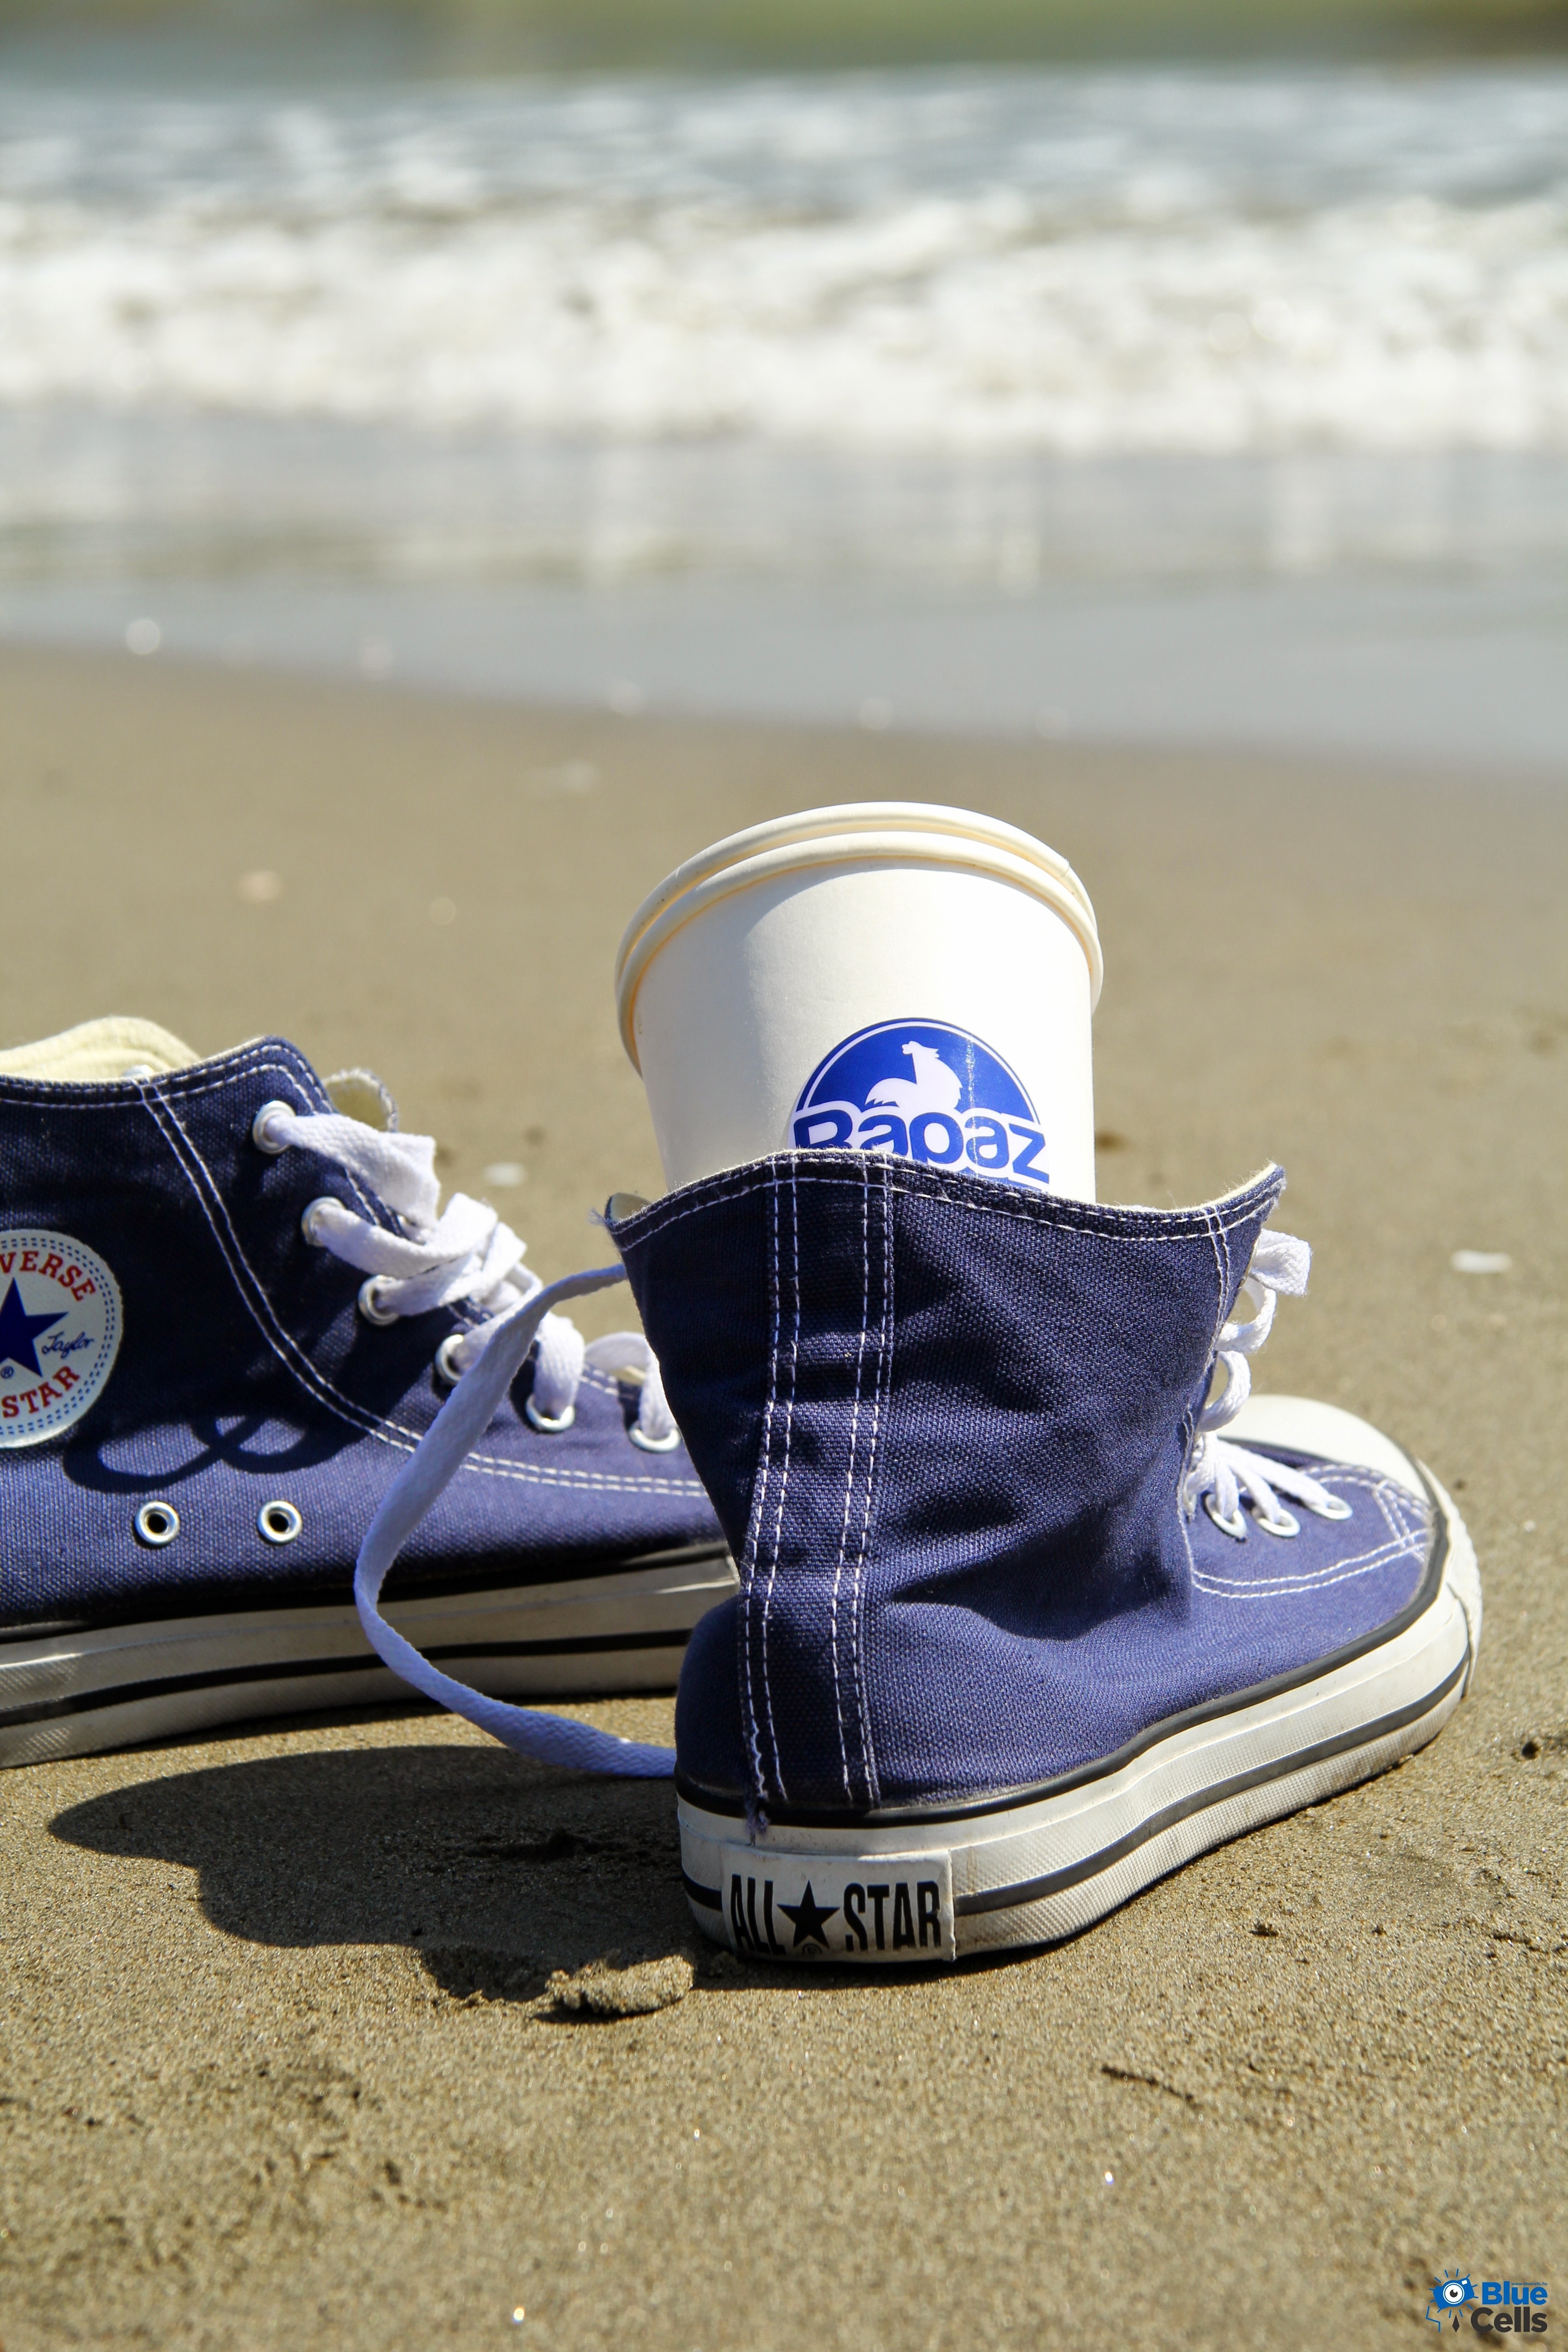 blue and white converse all star high top sneakers